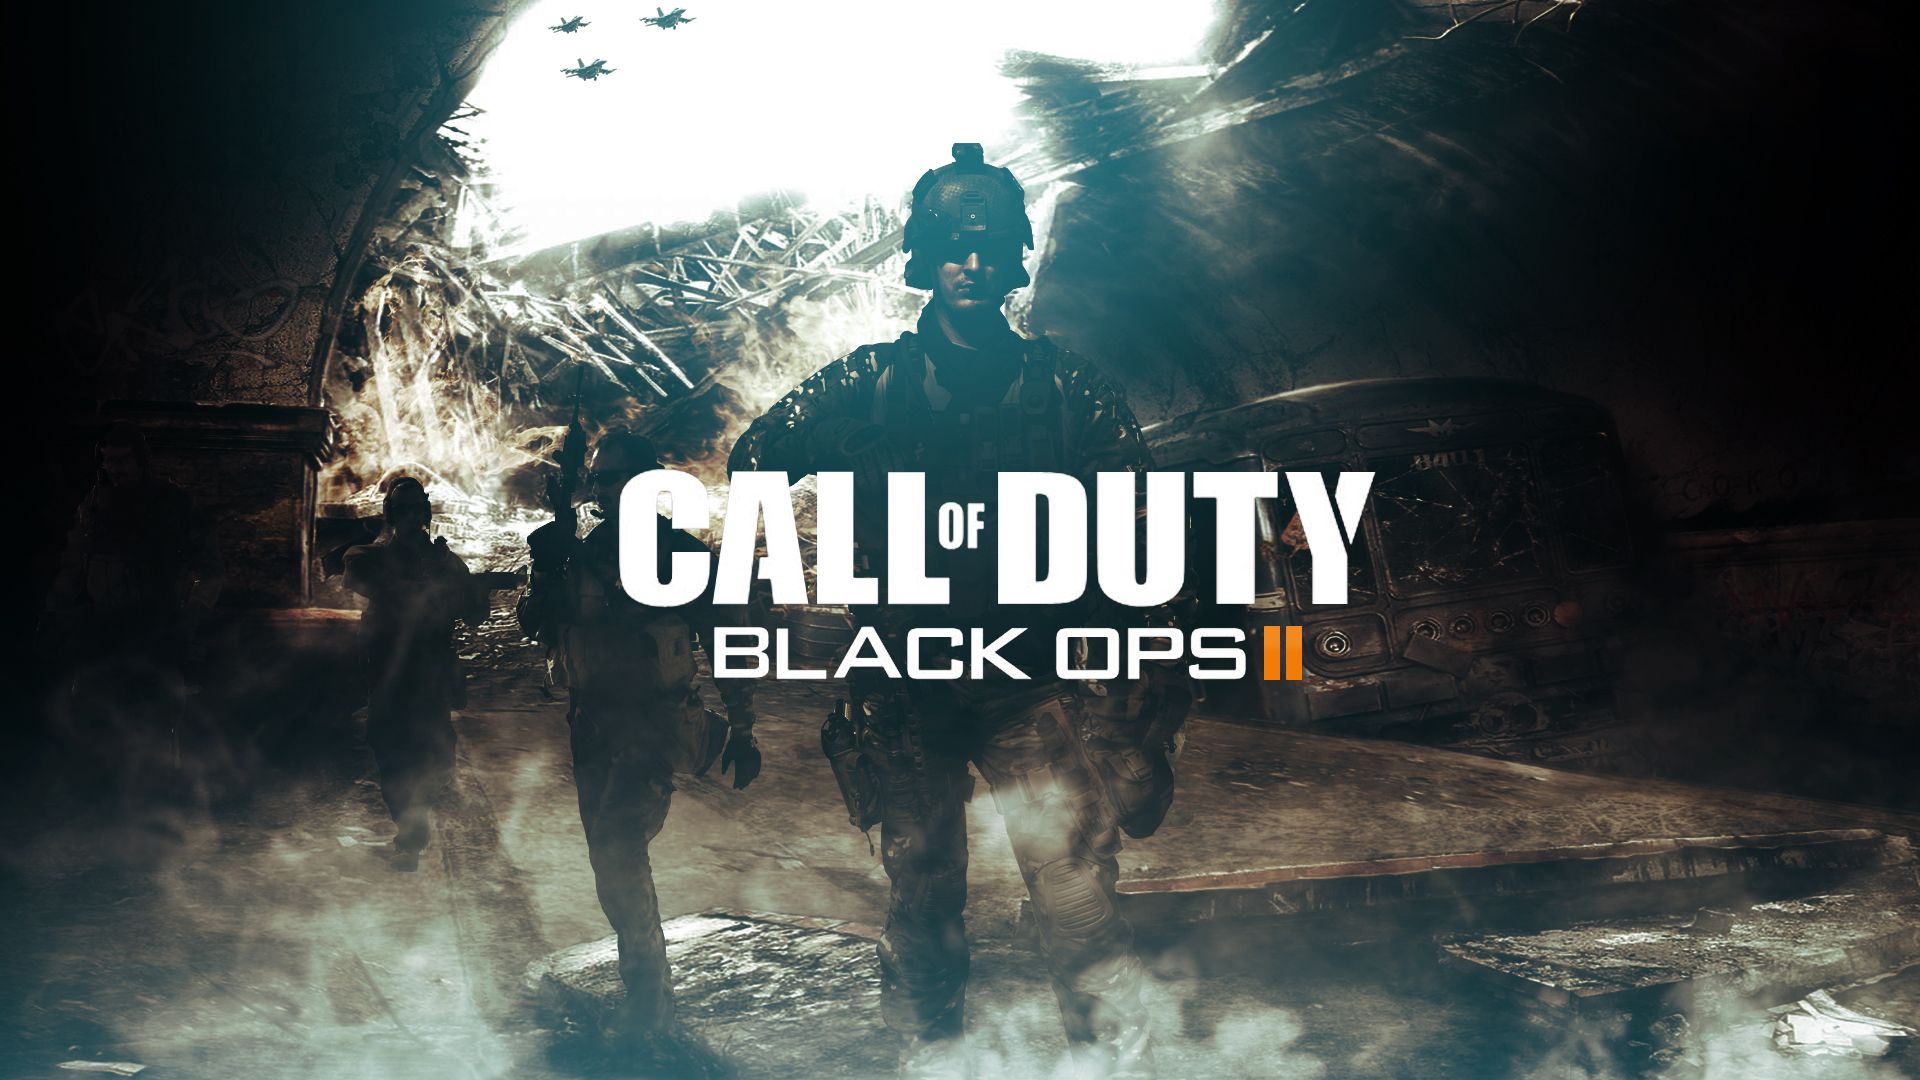 BO2] Made a fake Black Ops 2 Remastered Poster (Sorry for the watermark,  I'm paranoid of people stealing it and claiming it as their own) :  r/CallOfDuty